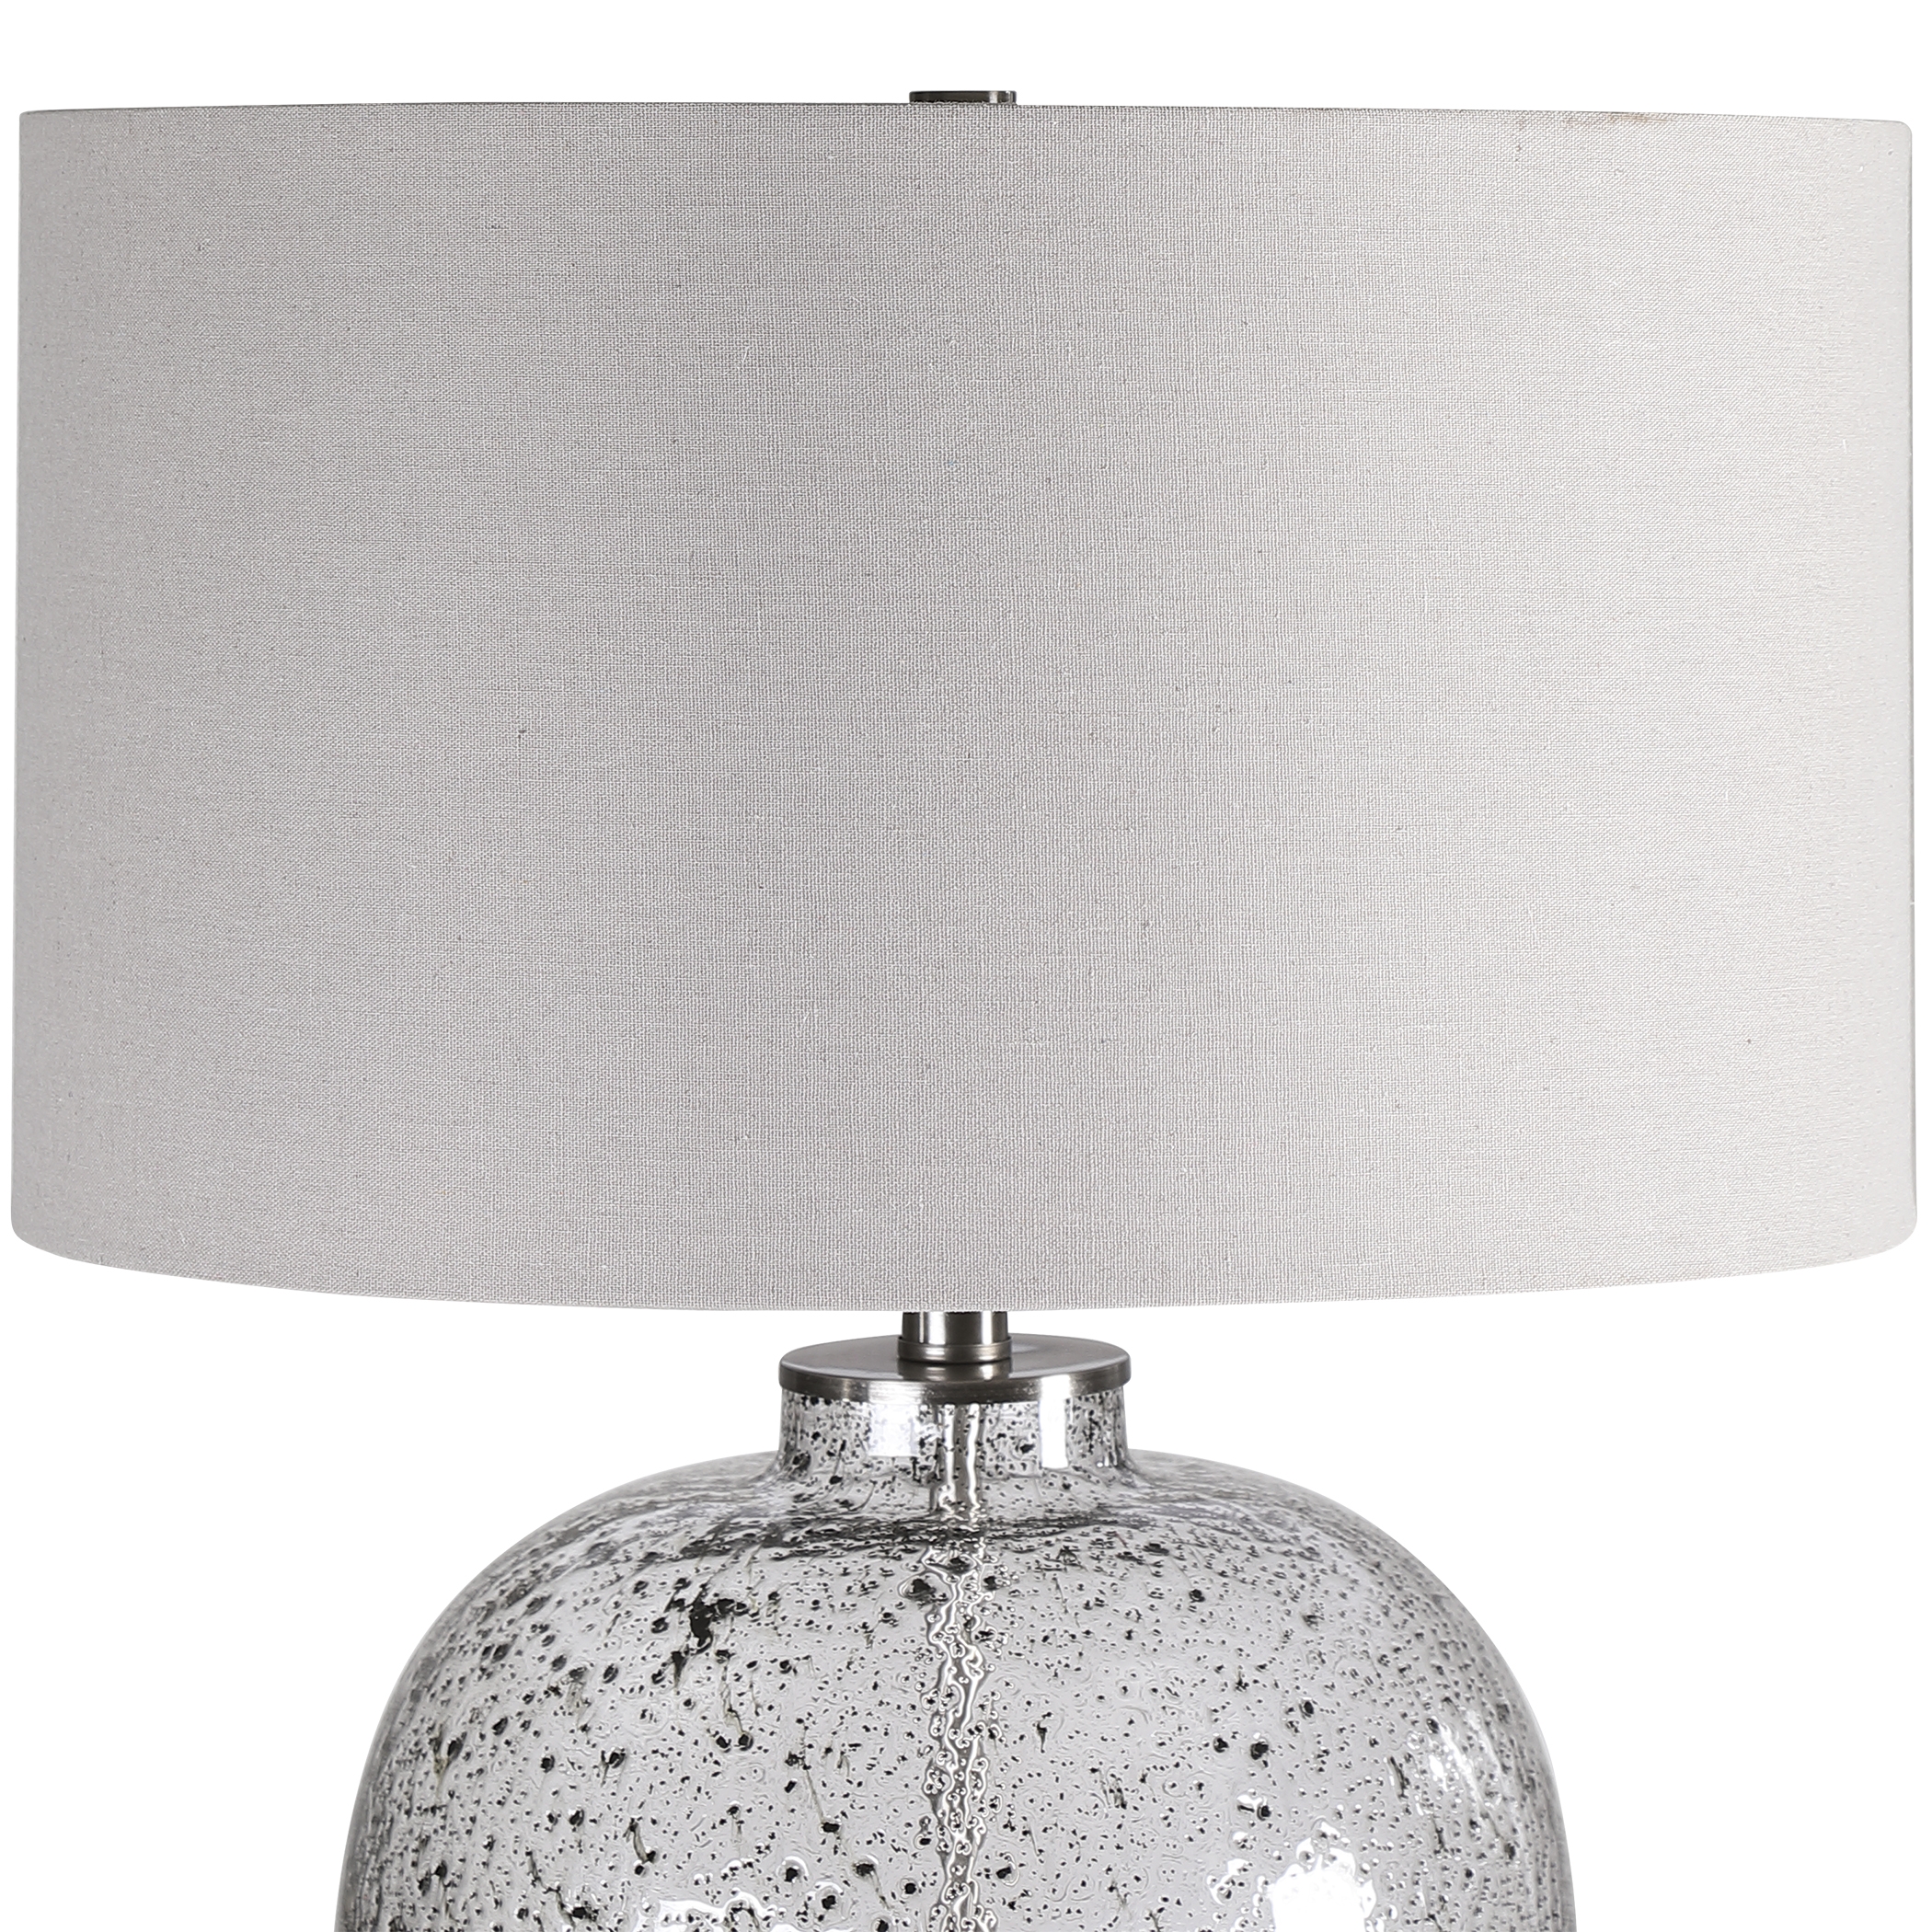 Storm Glass Table Lamp, 17" x 17" x 23.25" - Image 4